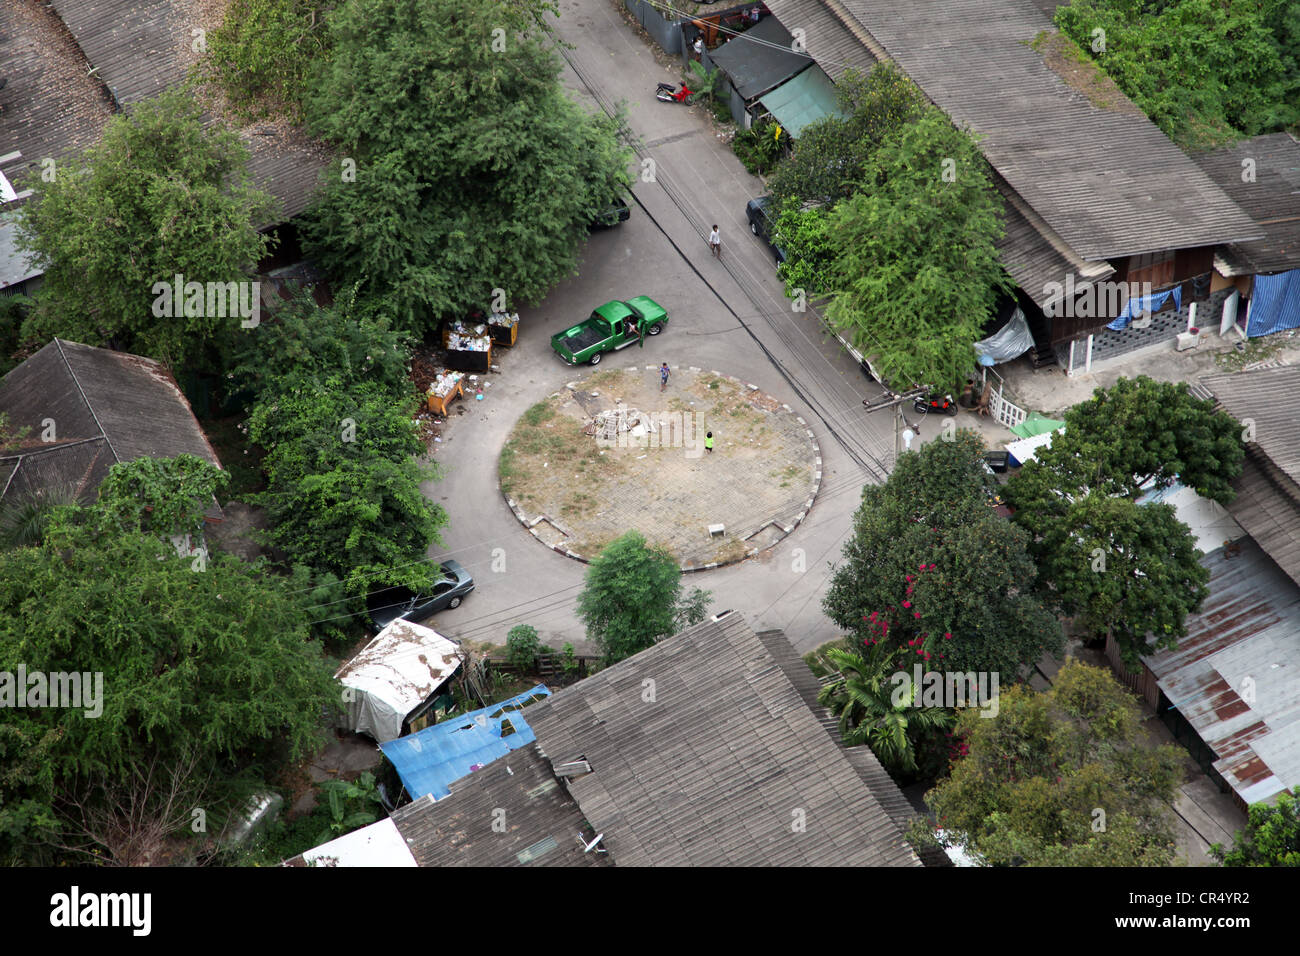 It's a photo of  detail of bangkok streets view from the sky. We can see park, car, trees and roads from the top. Stock Photo